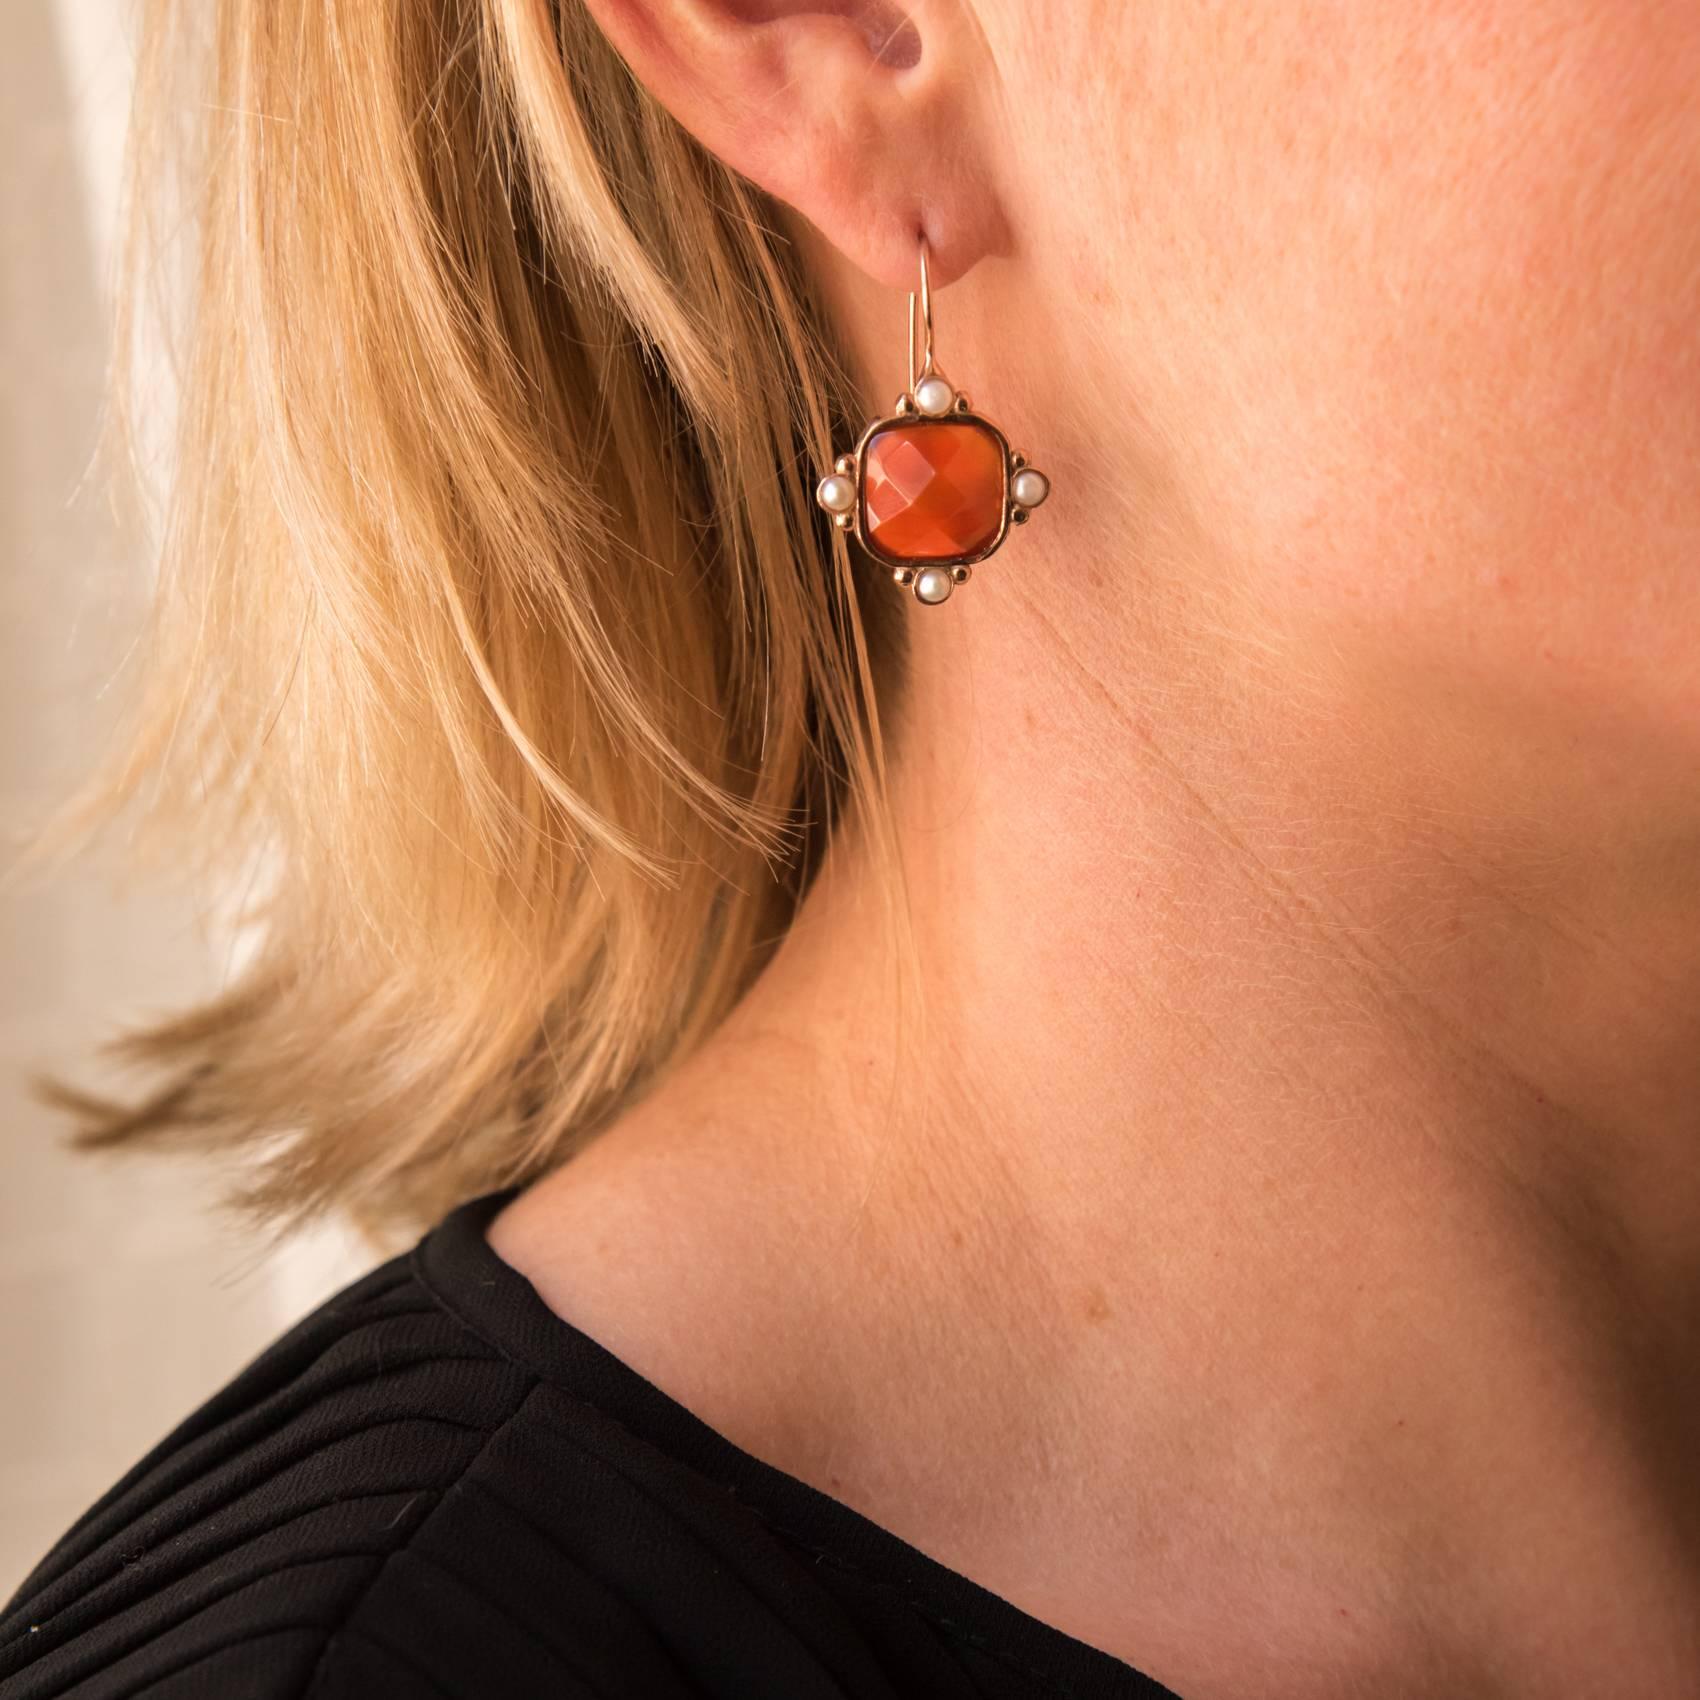 For pierced ears.
Earrings in vermeil, silver and rose gold.
Lever- back earrings, each is set with a faceted orange crystal surrounded by 4 white glass pearls closed set on both sides. The clasp is a gooseneck with safety hook.
Height: 3.2 cm,